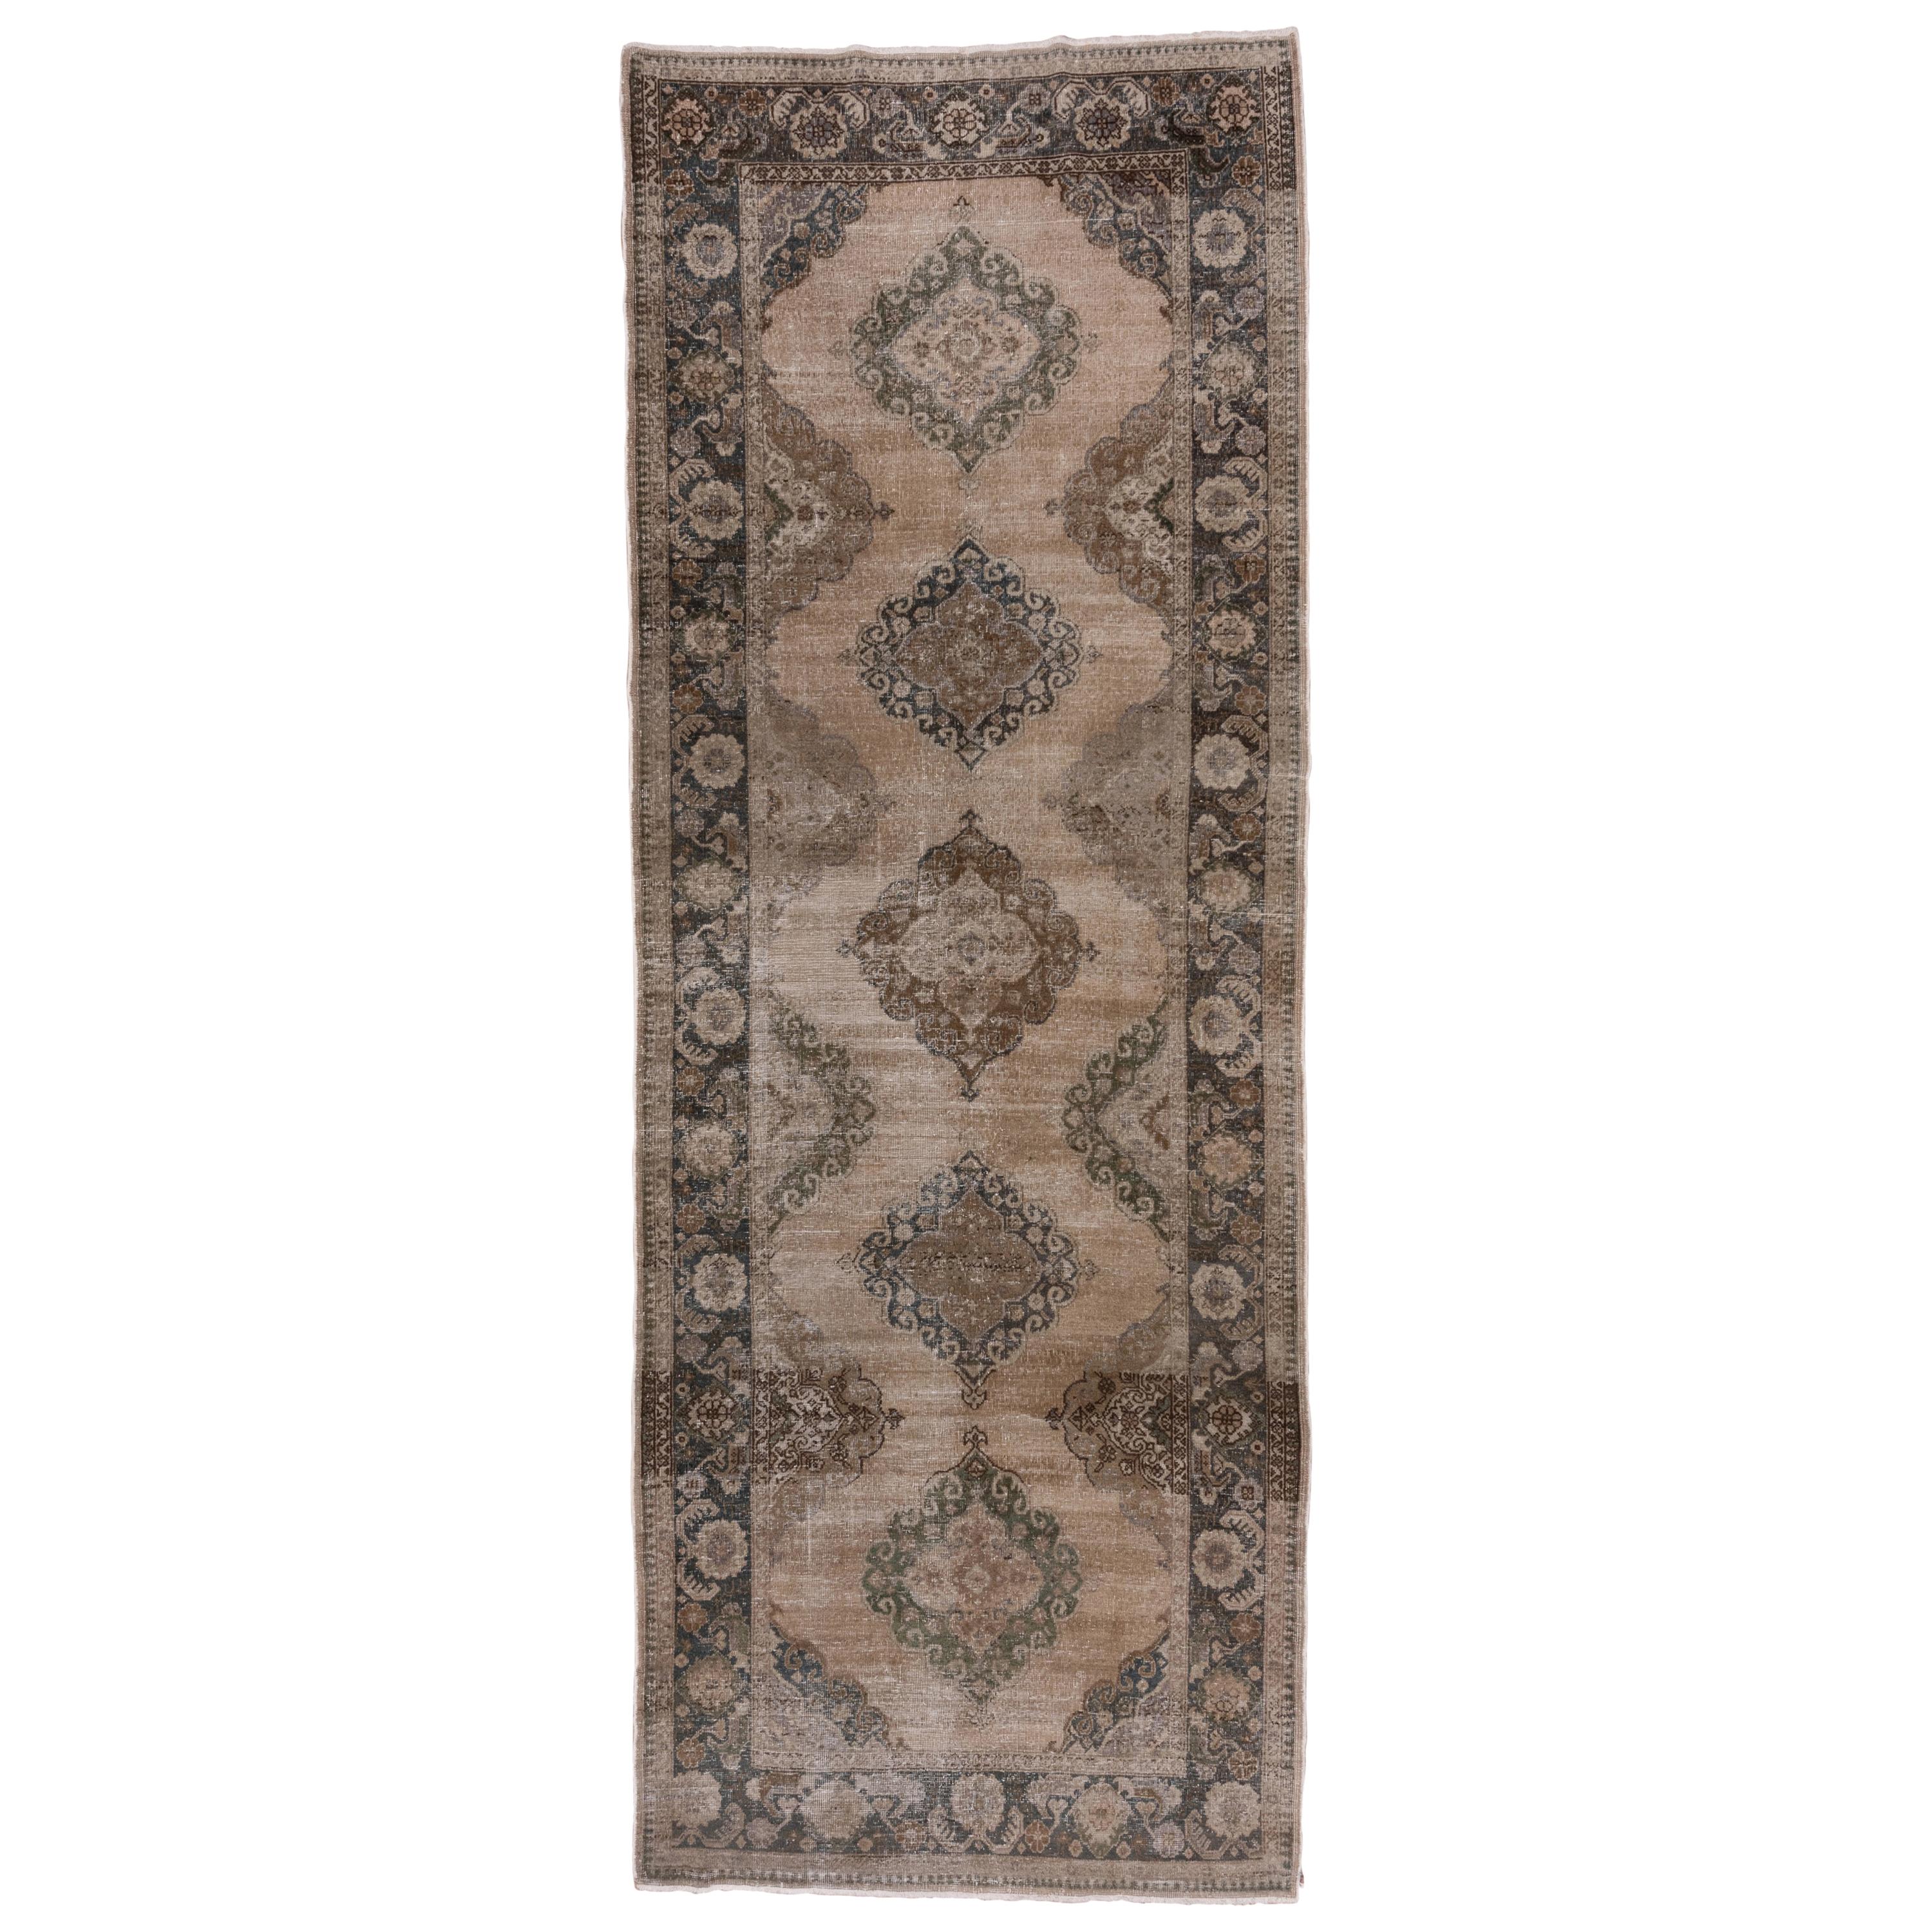 Vintage Shabby Chic Turkish Oushak Gallery Carpet, Earth Tones, Green Borders For Sale